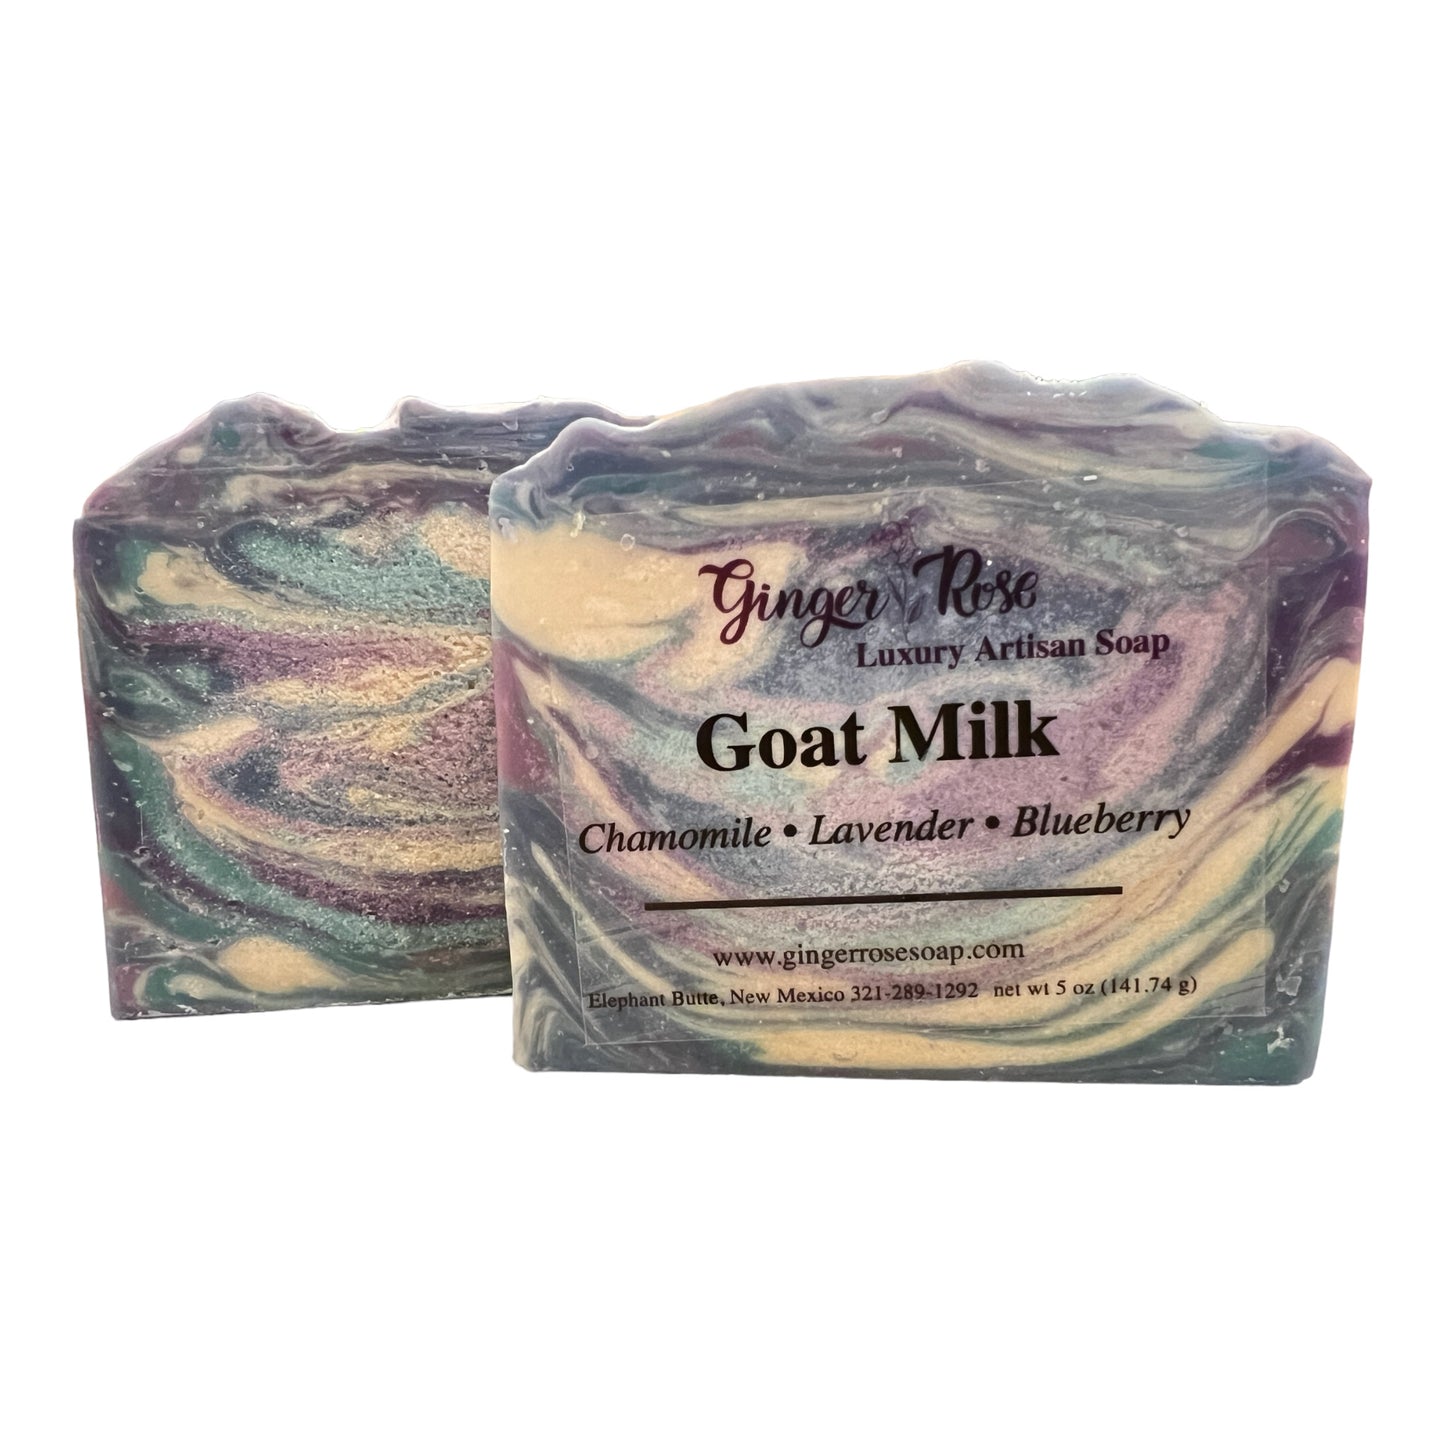 Soap - Goat Milk scented with Chamomile, Lavender and Blueberry